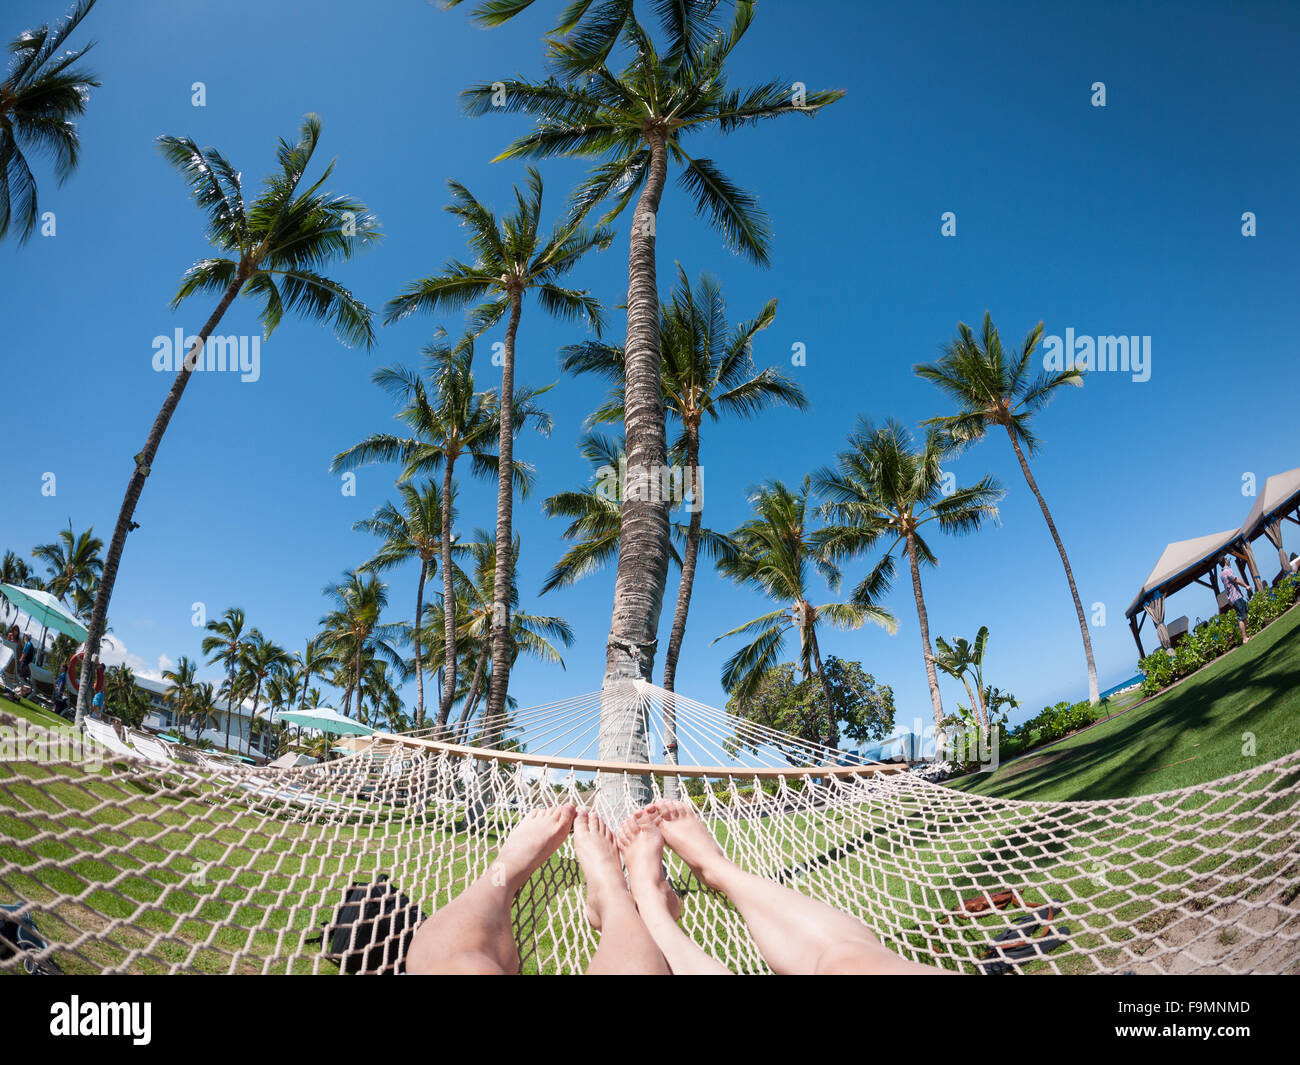 A wide angle fisheye view of a young couple's feet in a hammock on the grounds of the Fairmont Orchid, Kohala Coast, Hawai'i. Stock Photo